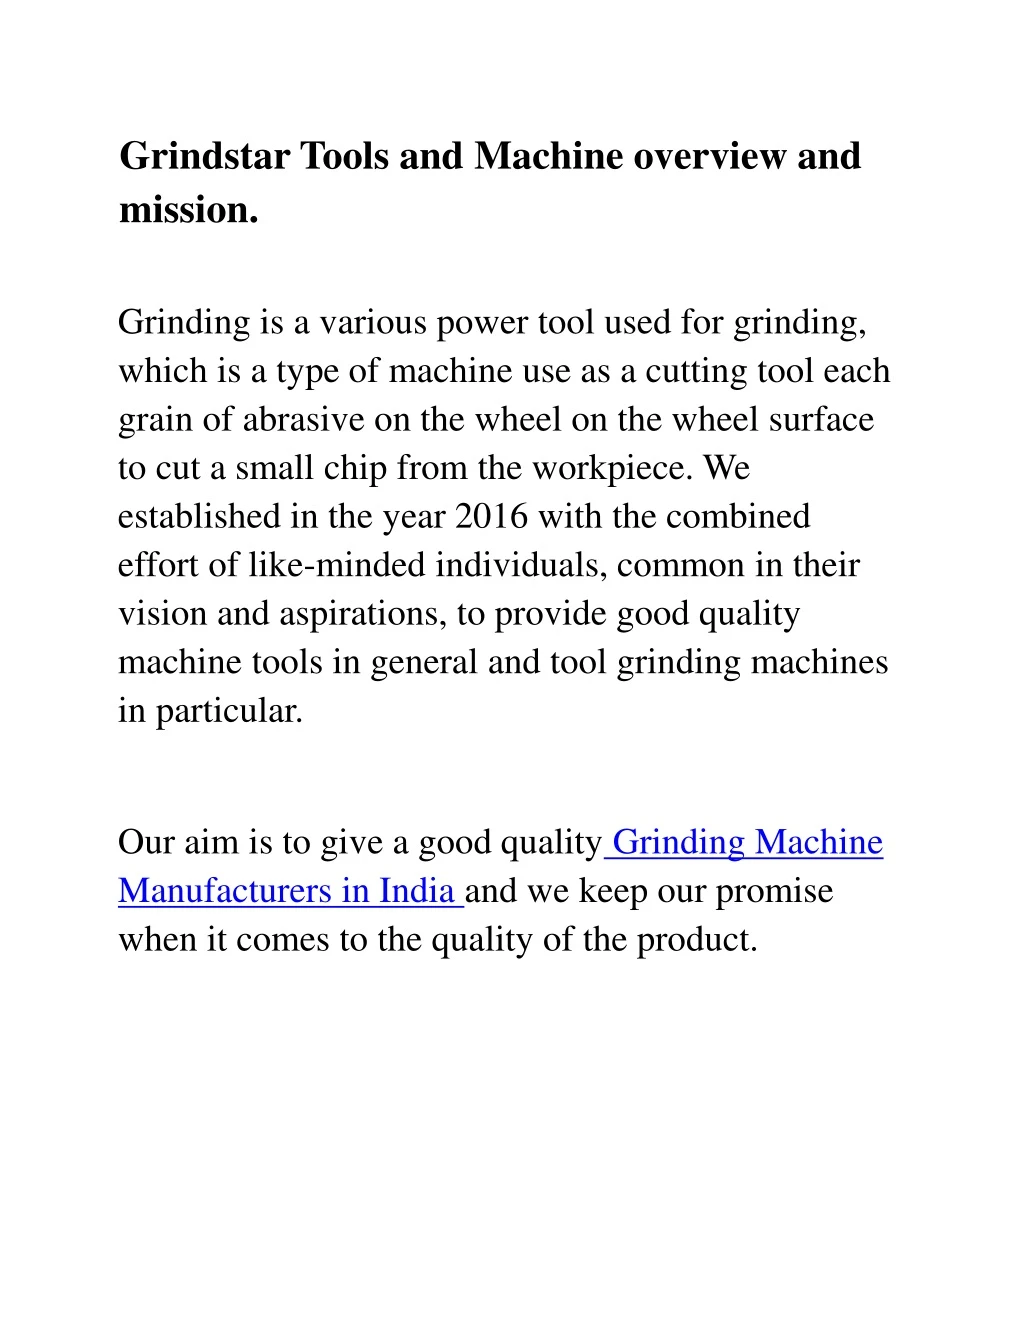 grindstar tools and machine overview and mission